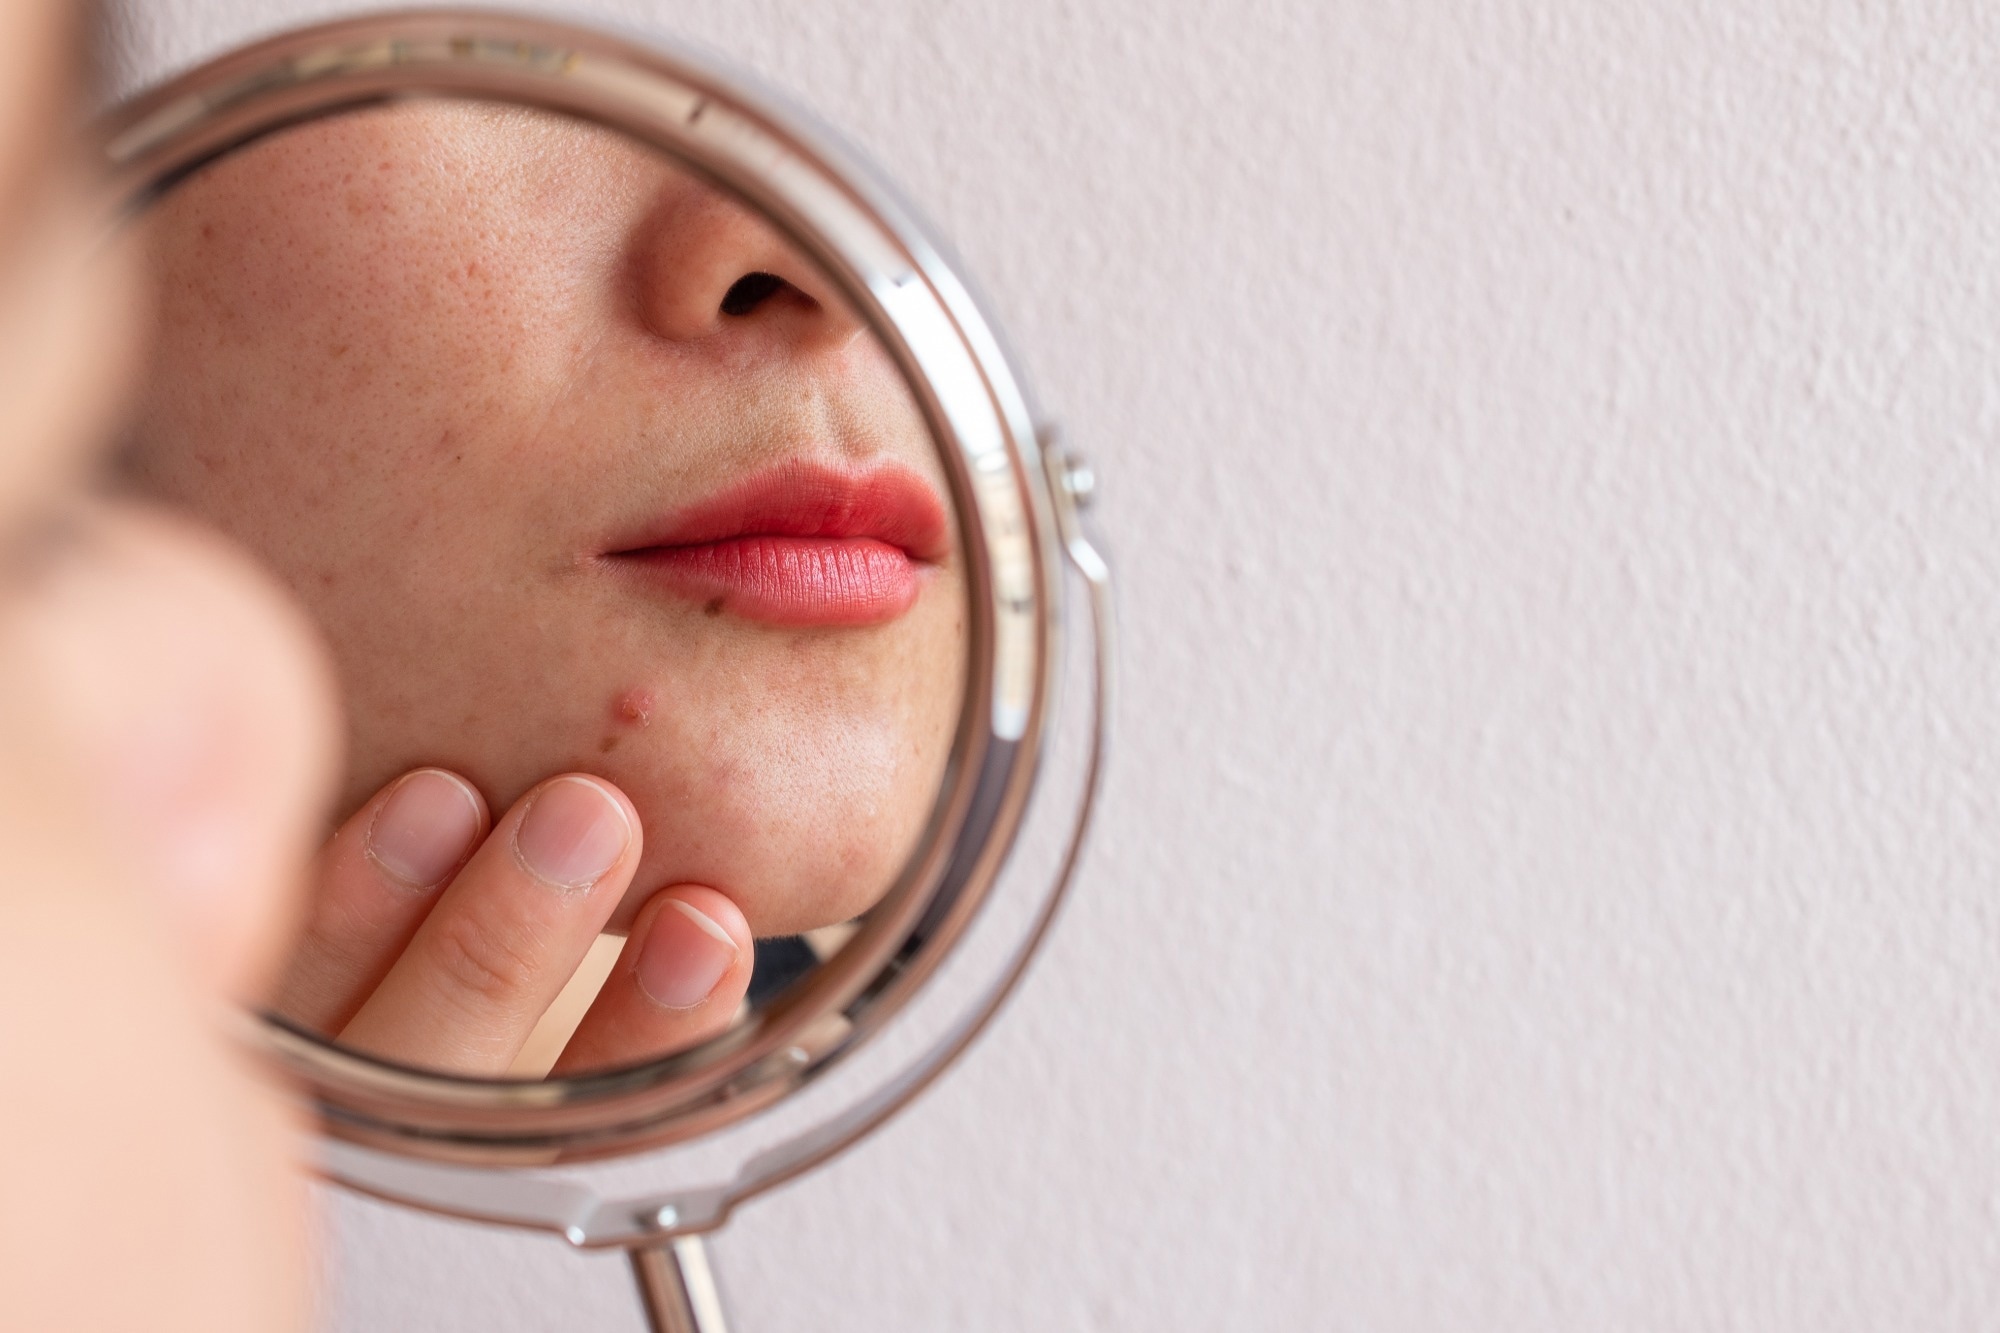 Study: Dietary Patterns in Acne and Rosacea Patients—A Controlled Study and Comprehensive Analysis. Image Credit: Boyloso/Shutterstock.com